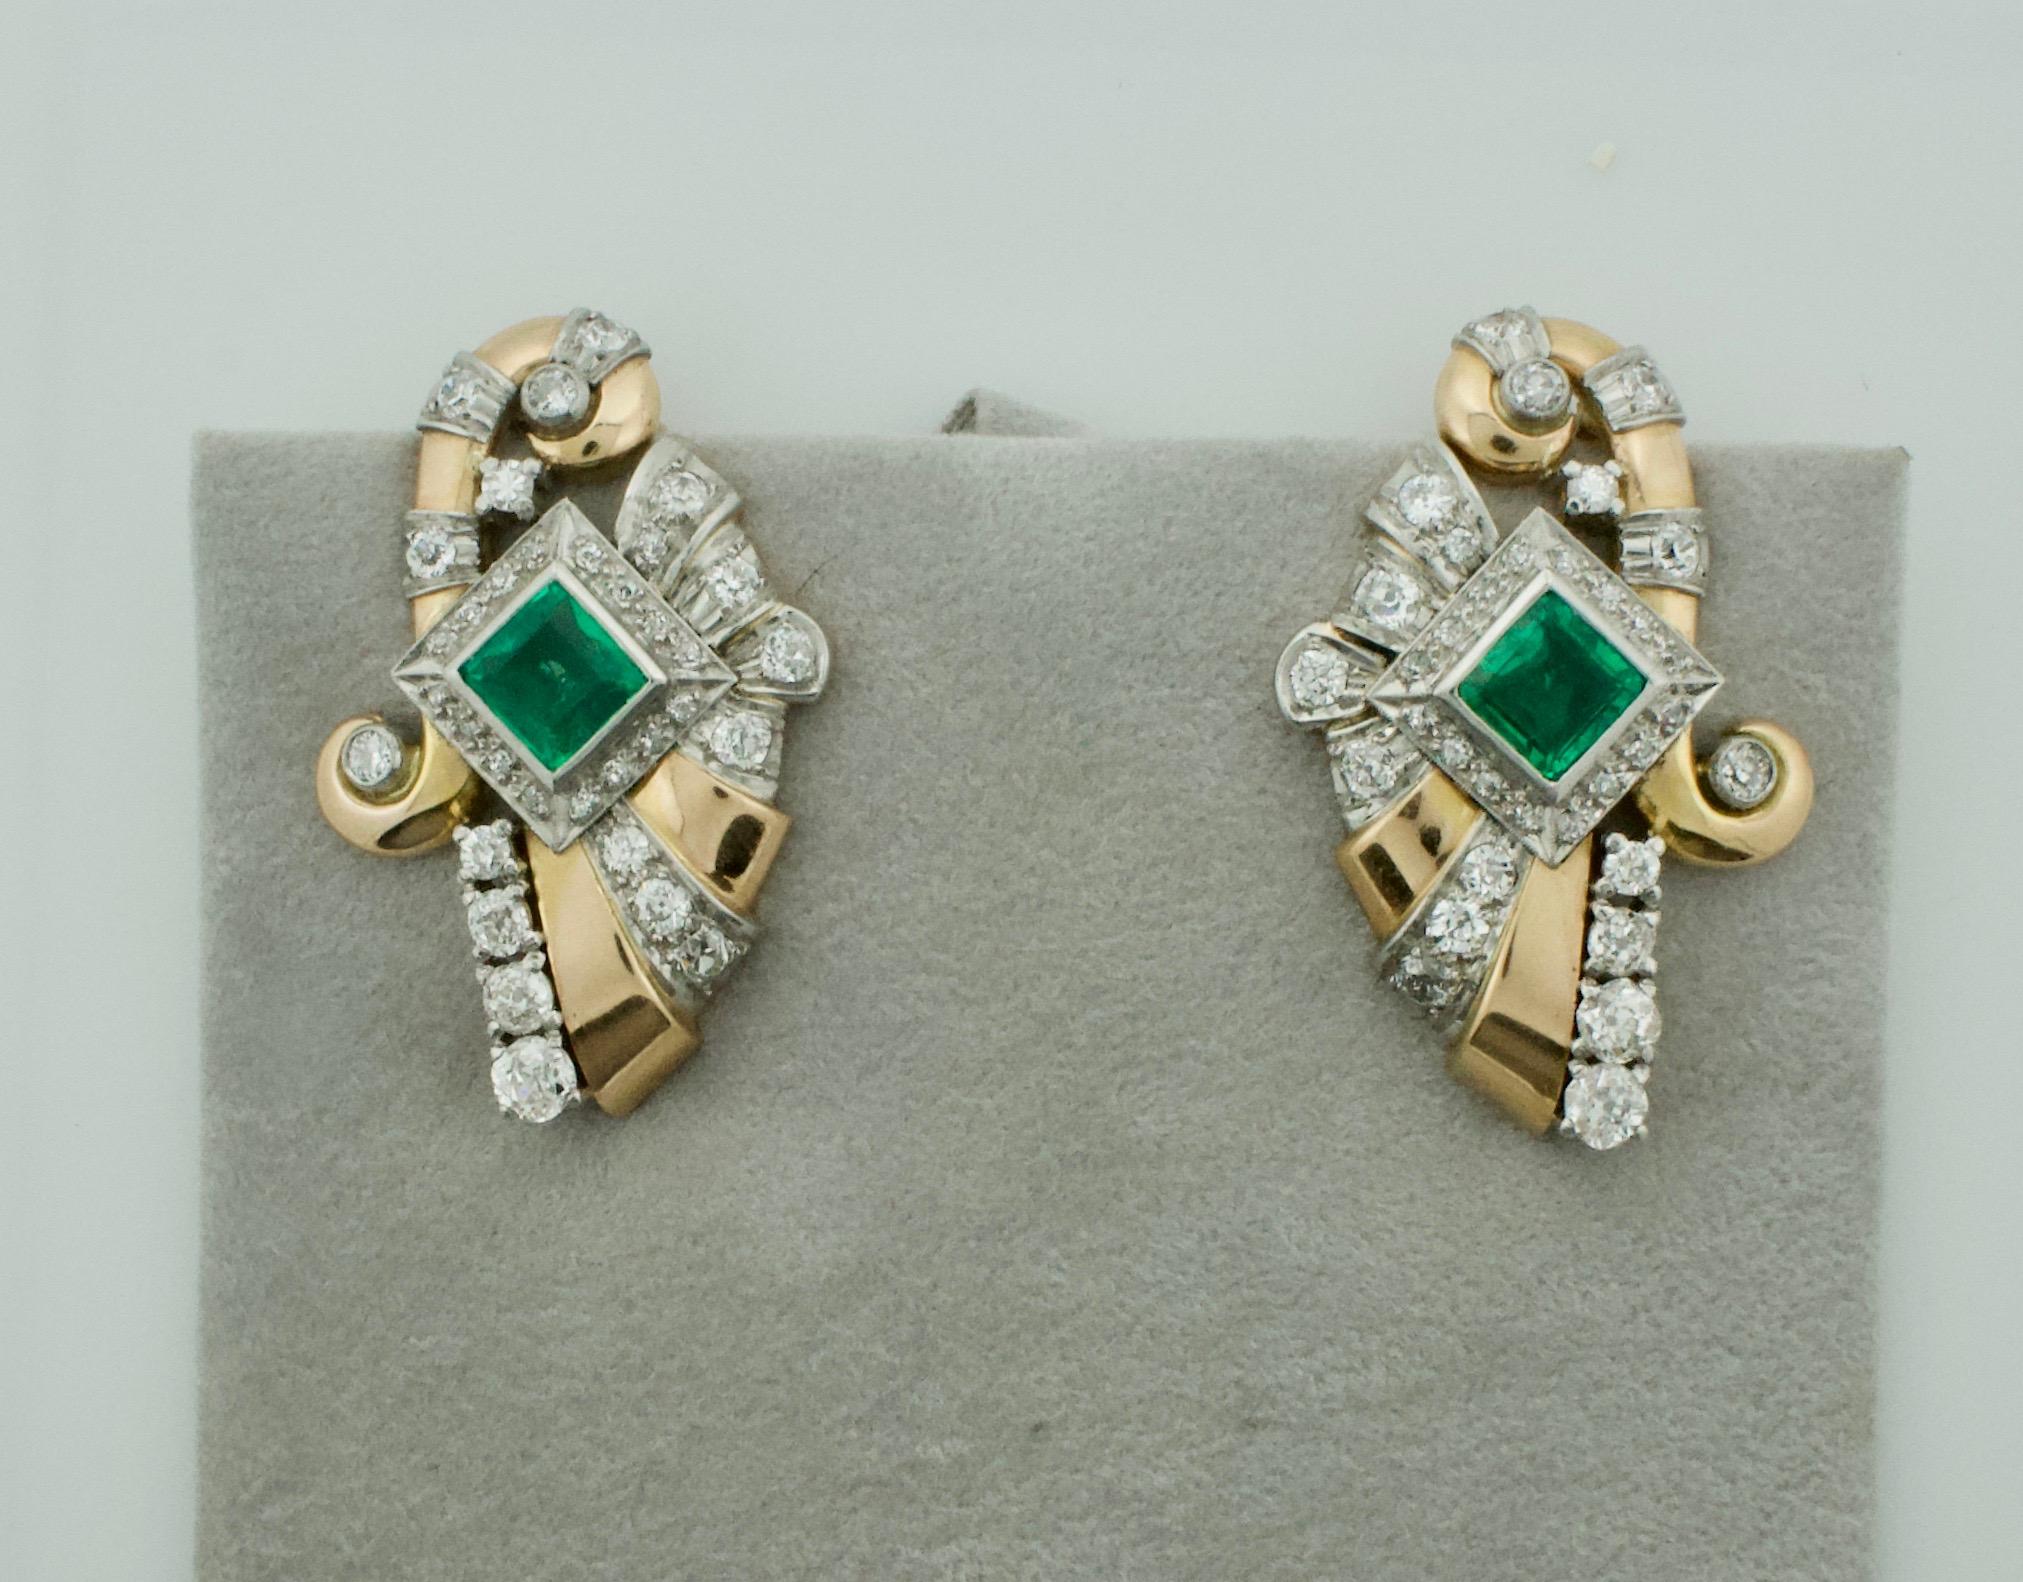 Retro Emerald and Diamond Earrings in 18k and Platinum c. 1940's
Two Square Cut Diamonds weighing 3.00 carats approximately [Slightly Included Very Bright Material]
Sixty Six Old Mine and Old European Cut Diamonds weighing 3.65 carats approximately